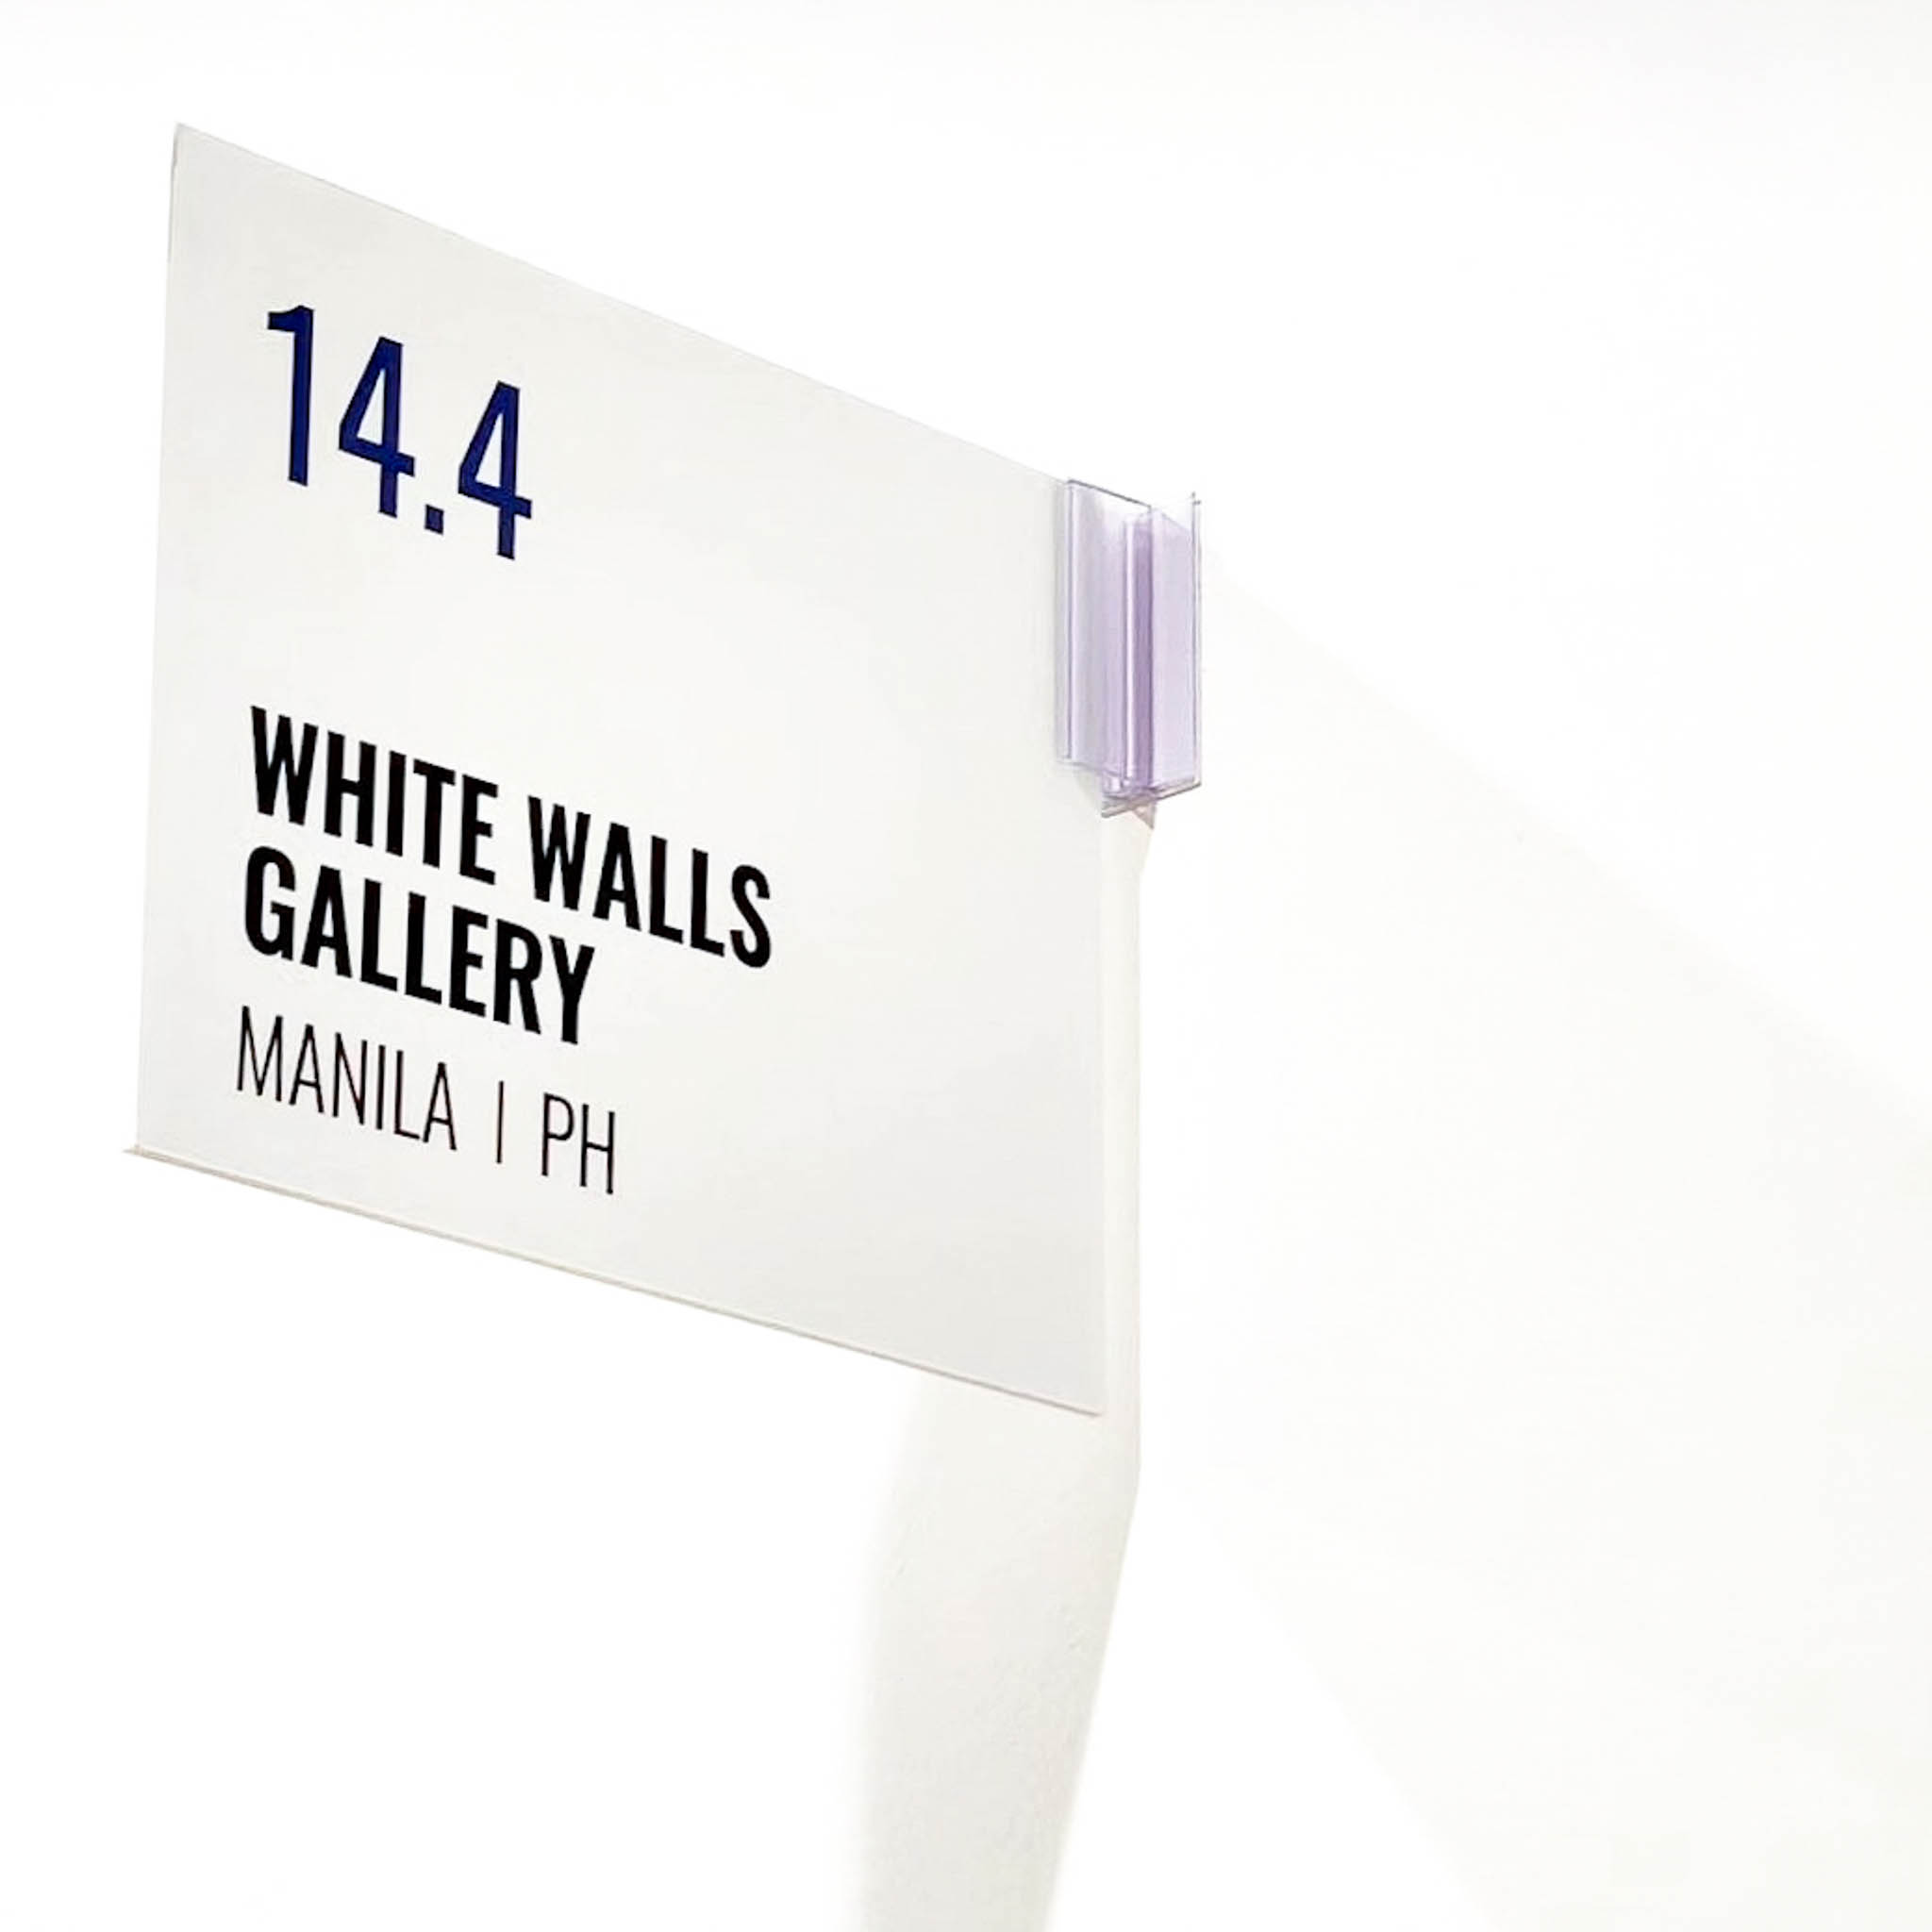 White Walls Gallery the sole Philippine exhibition at the Focus London 2023 art fair